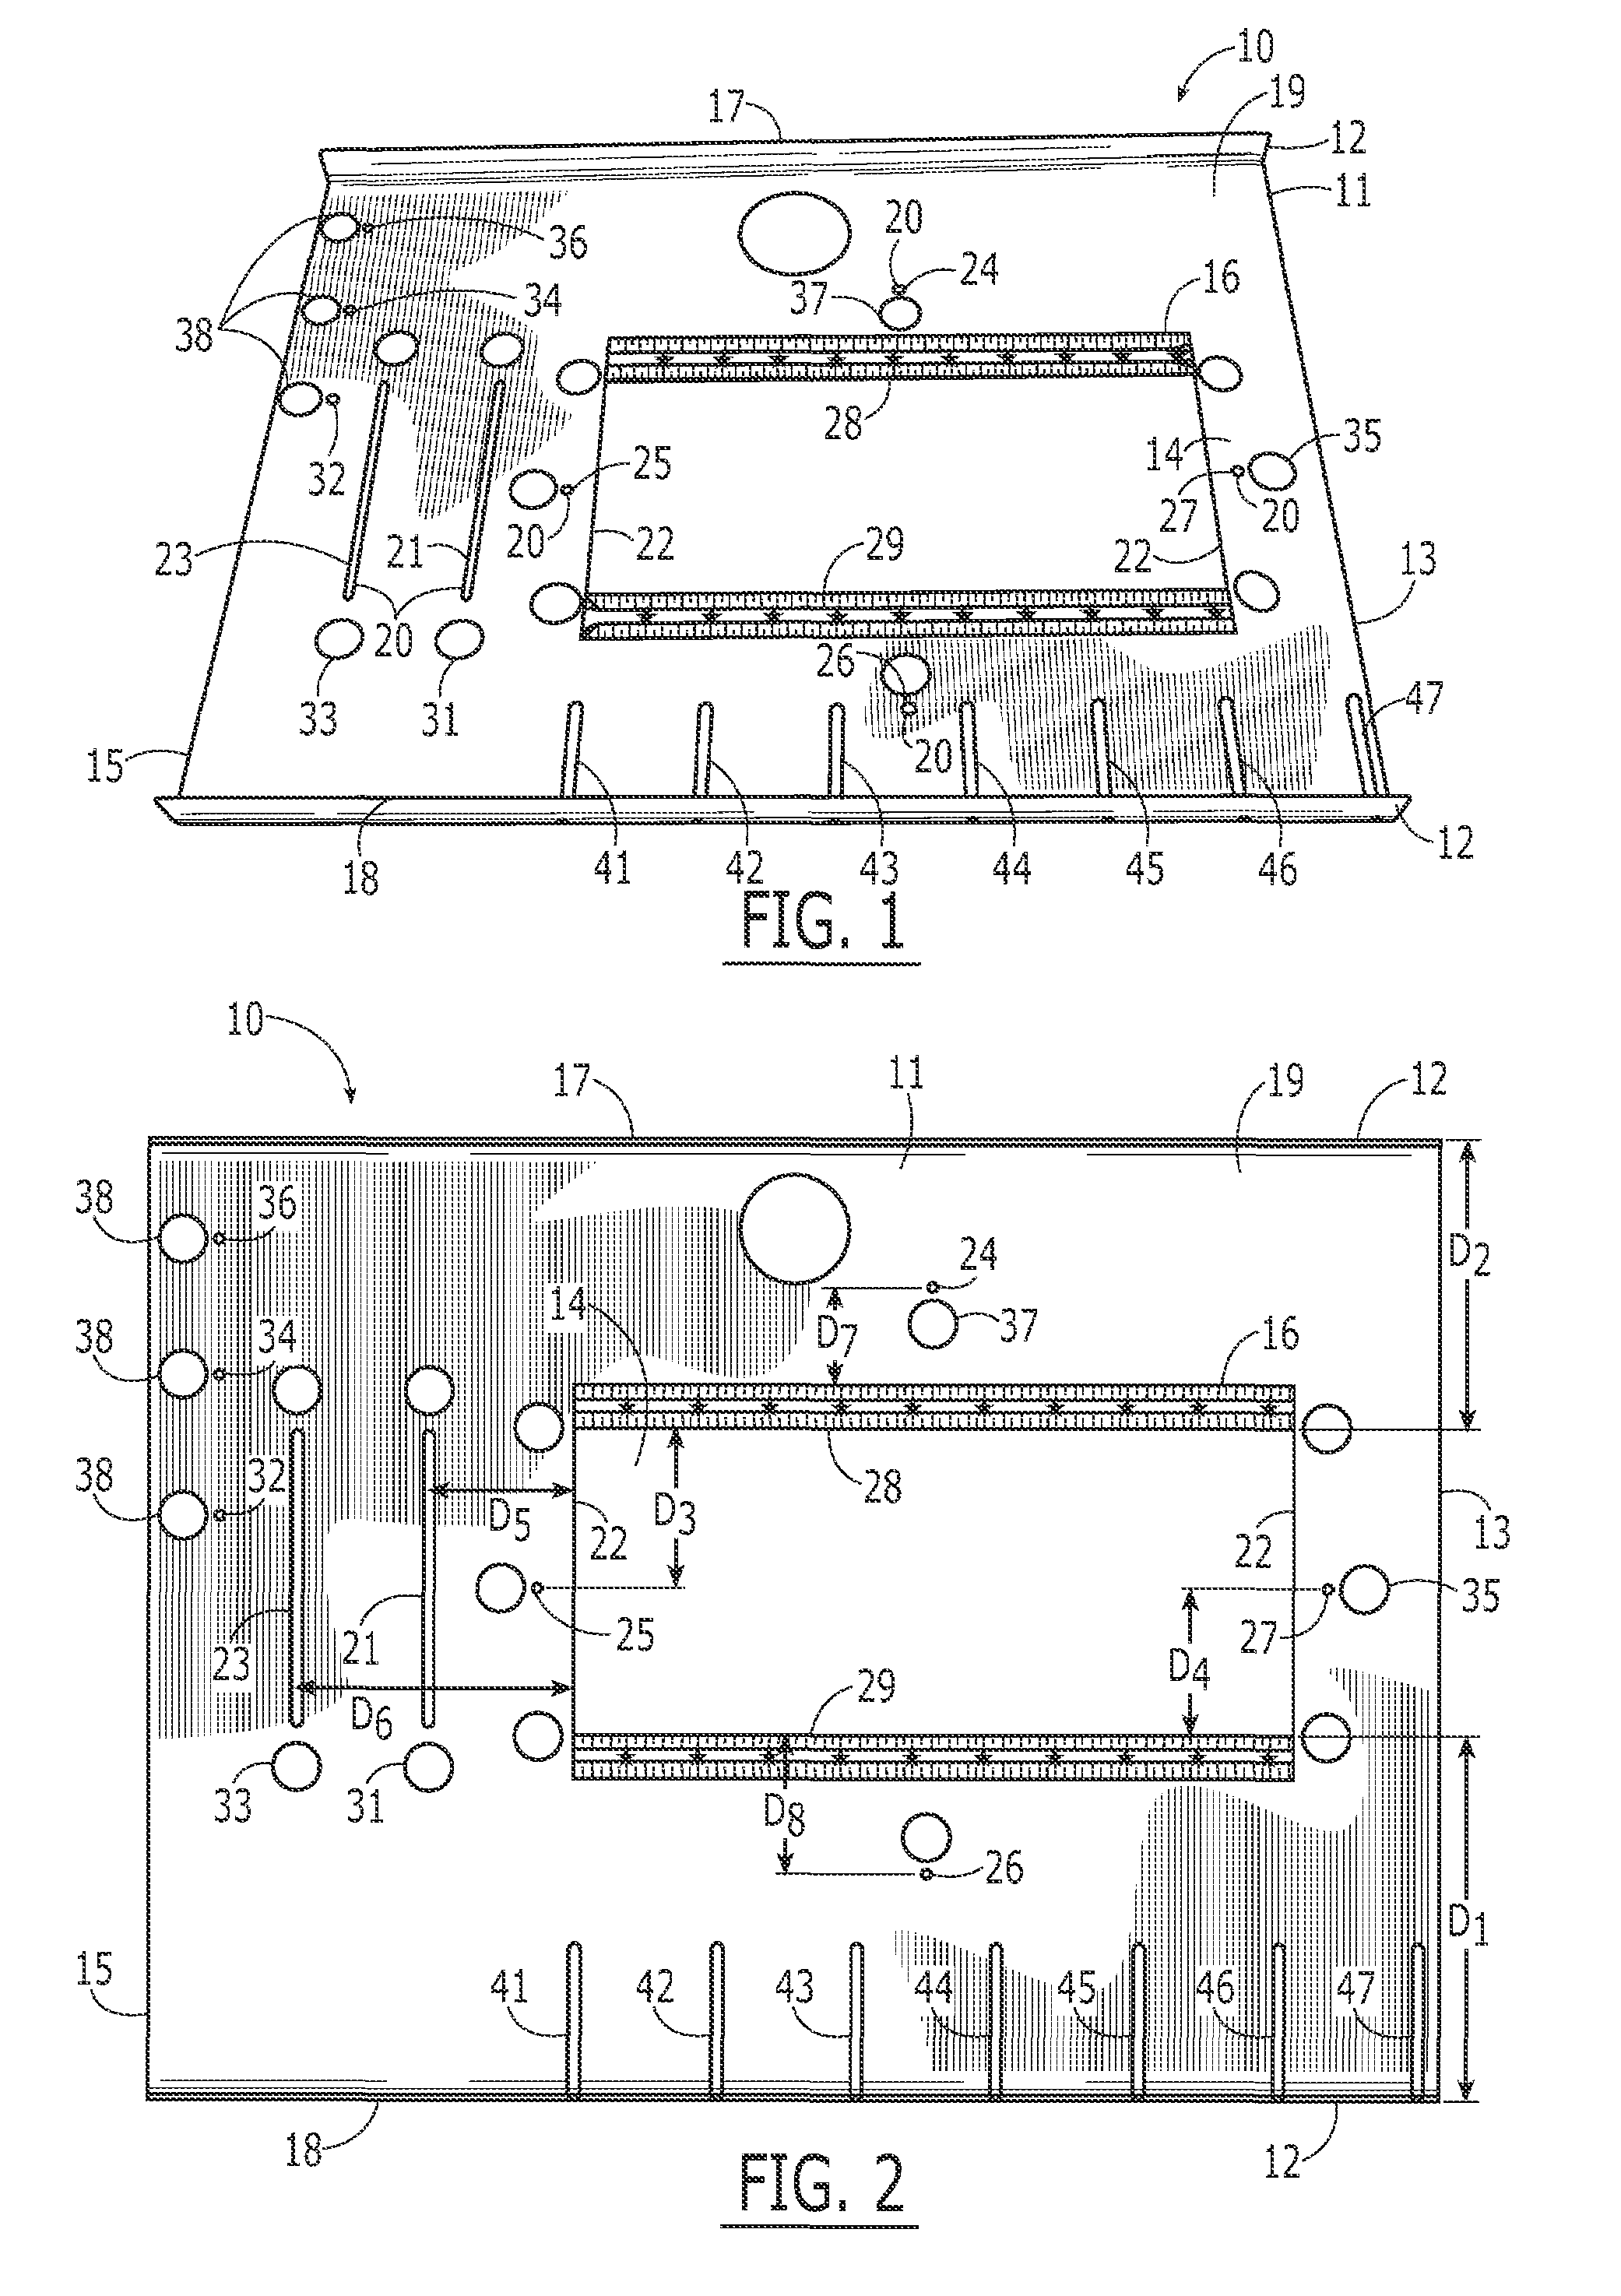 Template for positioning vents or boots for an HVAC system